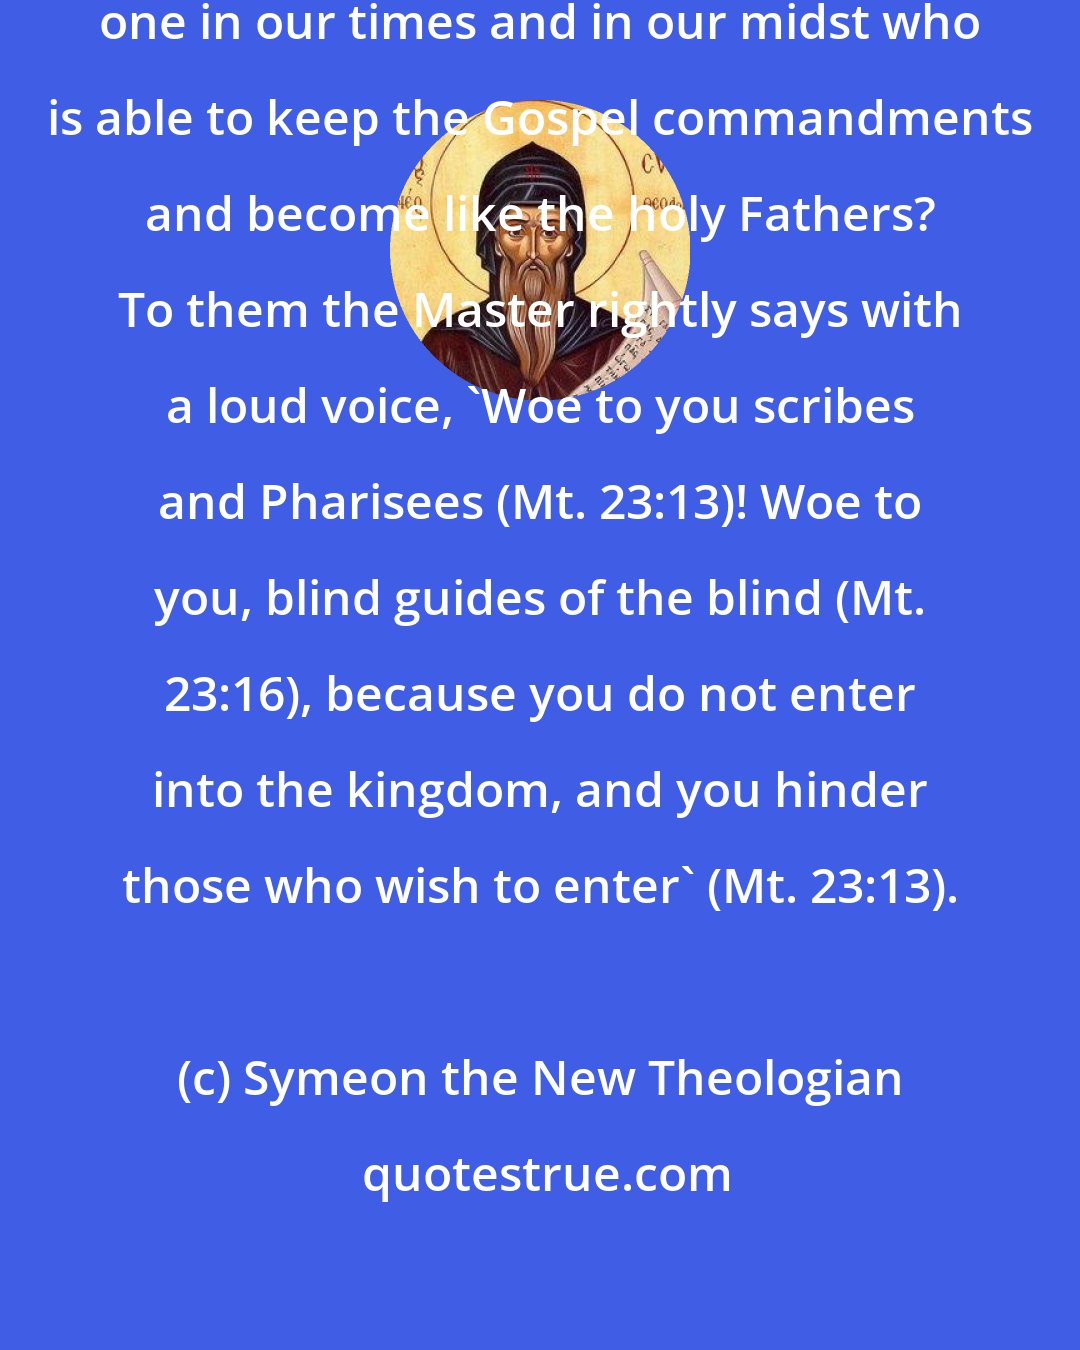 Symeon the New Theologian: ... men... who say that there is no one in our times and in our midst who is able to keep the Gospel commandments and become like the holy Fathers? To them the Master rightly says with a loud voice, 'Woe to you scribes and Pharisees (Mt. 23:13)! Woe to you, blind guides of the blind (Mt. 23:16), because you do not enter into the kingdom, and you hinder those who wish to enter' (Mt. 23:13).